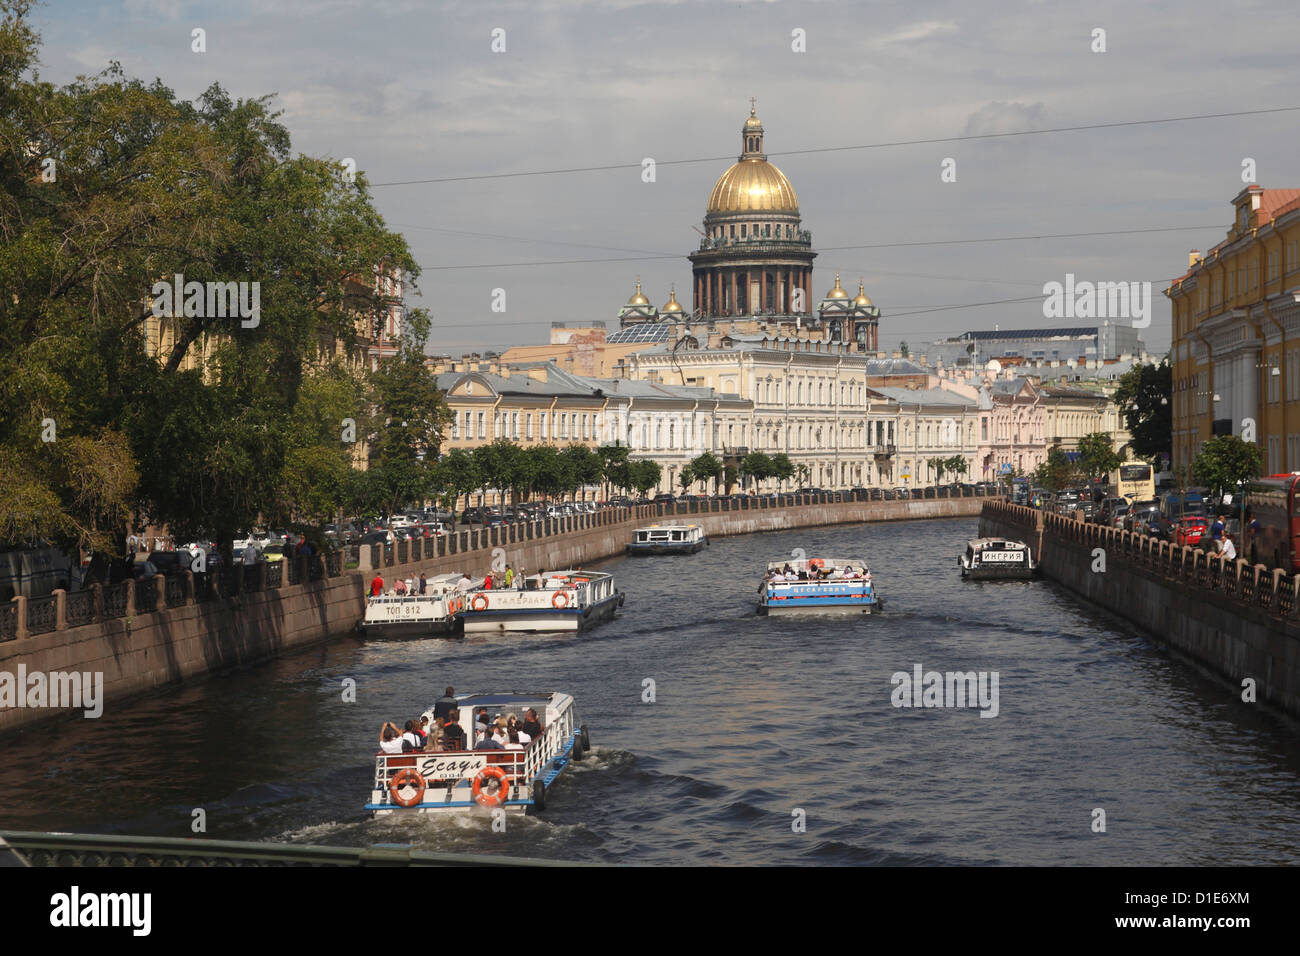 Dome of St. Isaac's Cathedral and canal, St. Petersburg, Russia, Europe Stock Photo